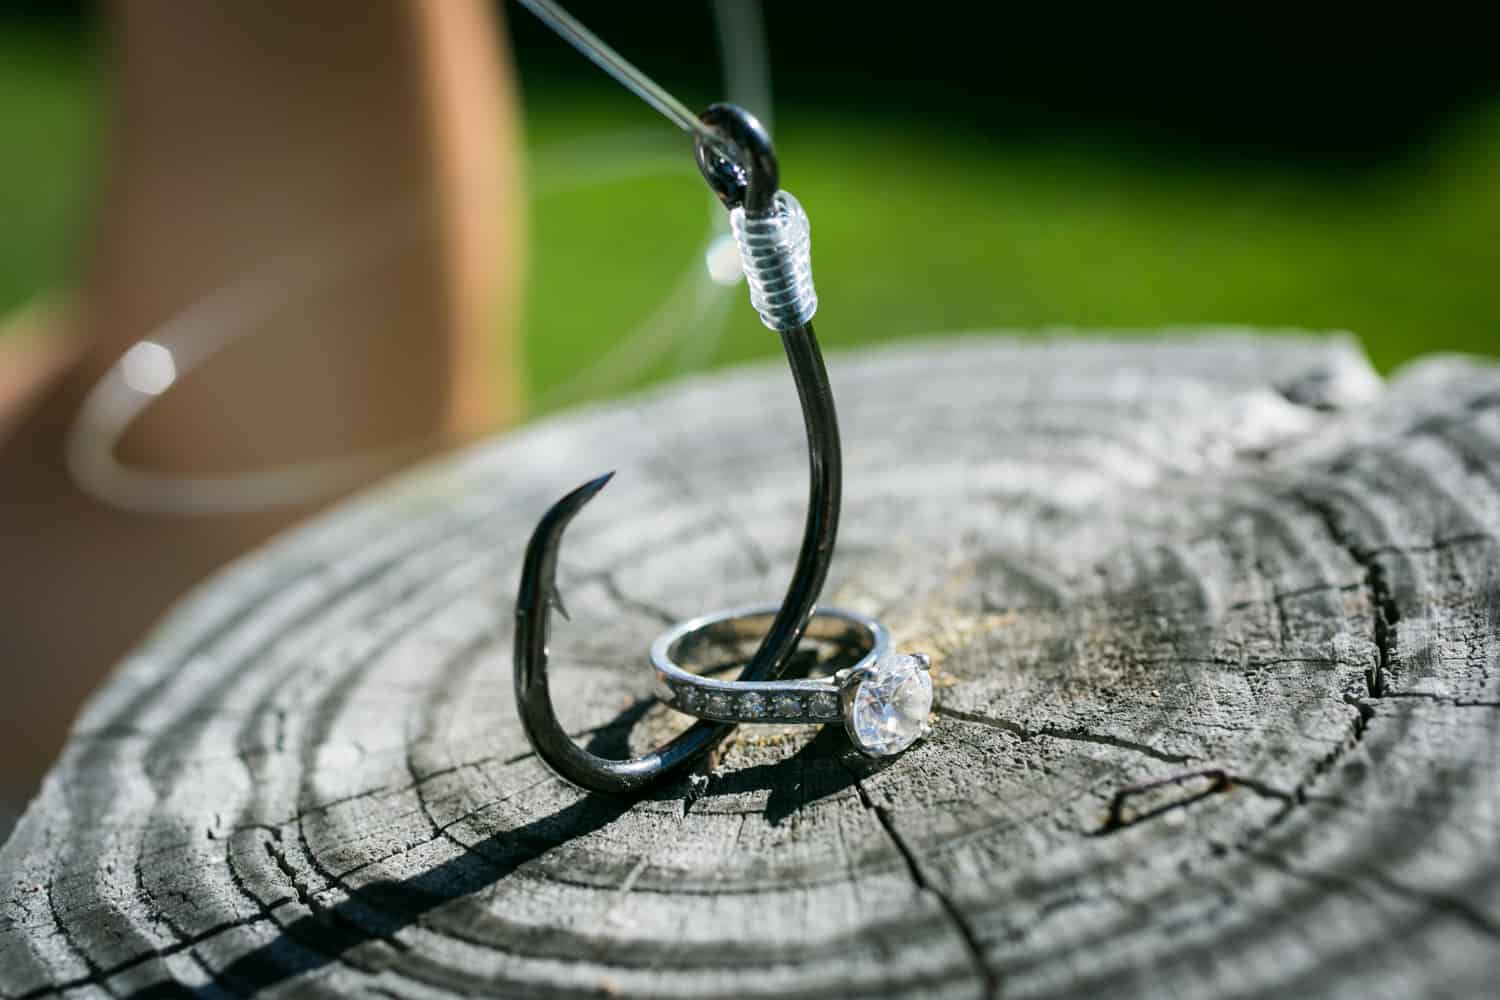 Fishing hook and engagement ring